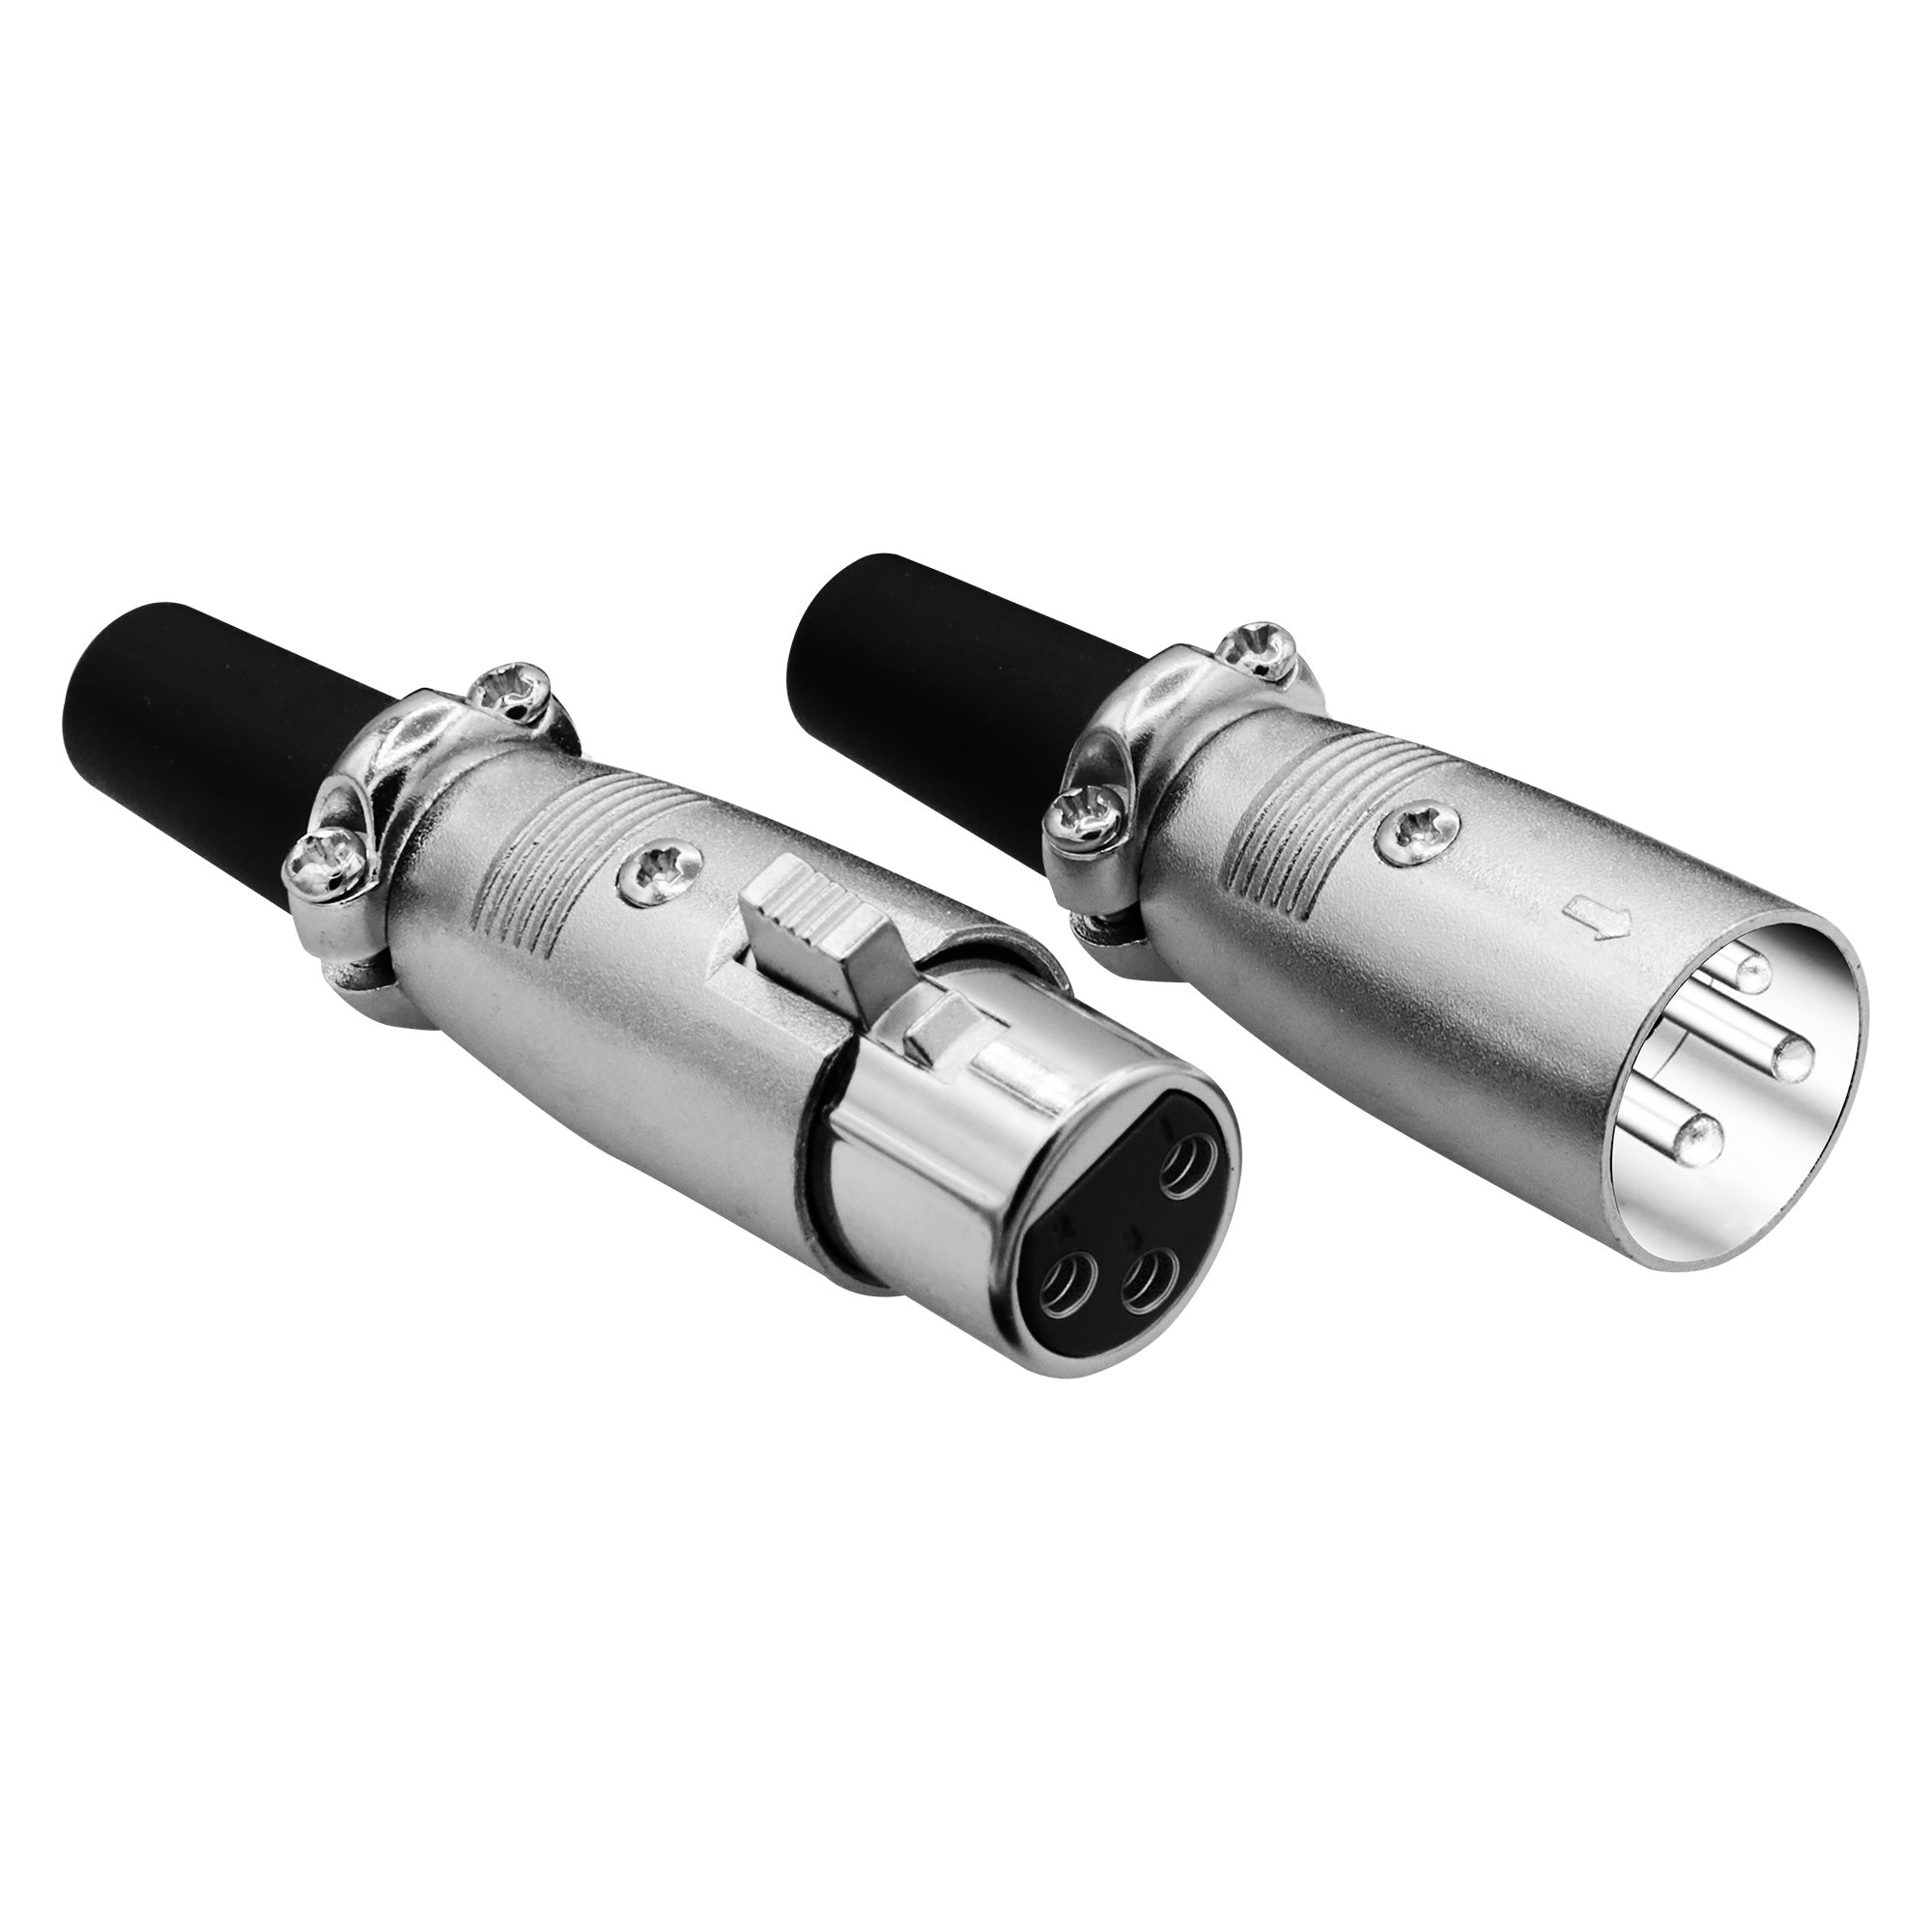 Male XLR connector: sturdy metal construction for professional audio applications.